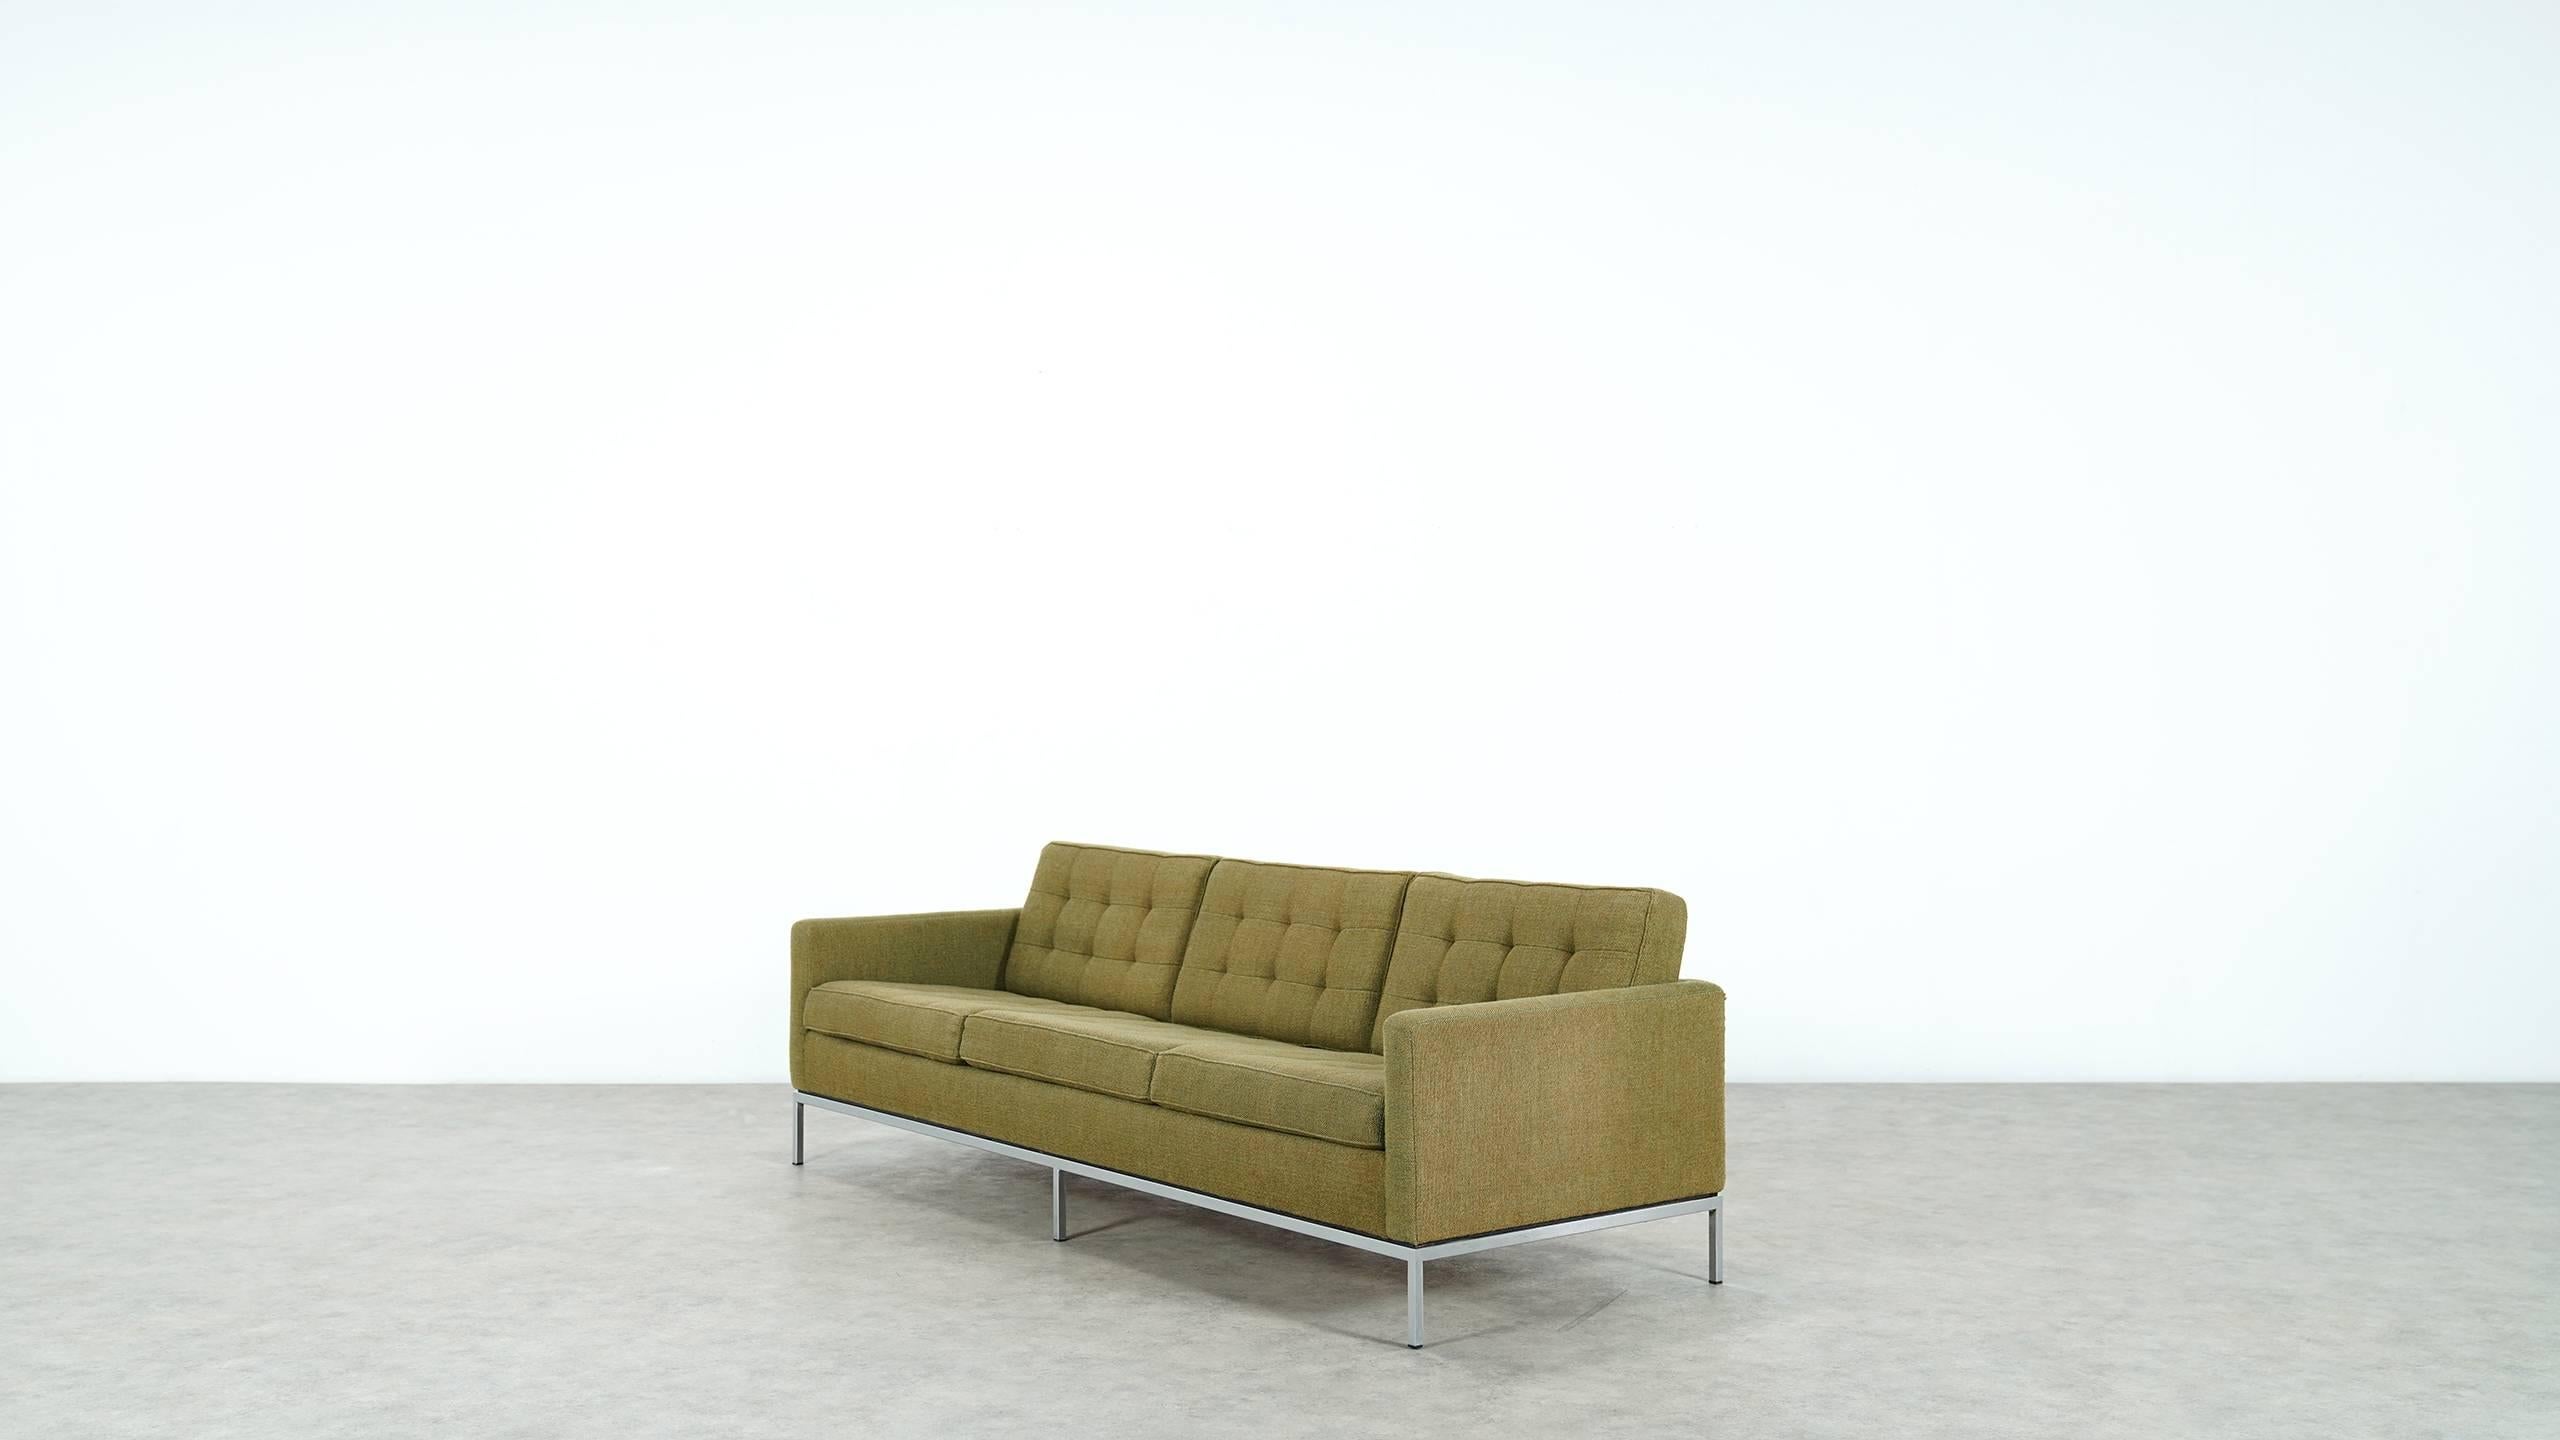 Mid-20th Century Florence Knoll, Sofa and Lounge Chair, 1954 for Knoll International, in Kvadrat